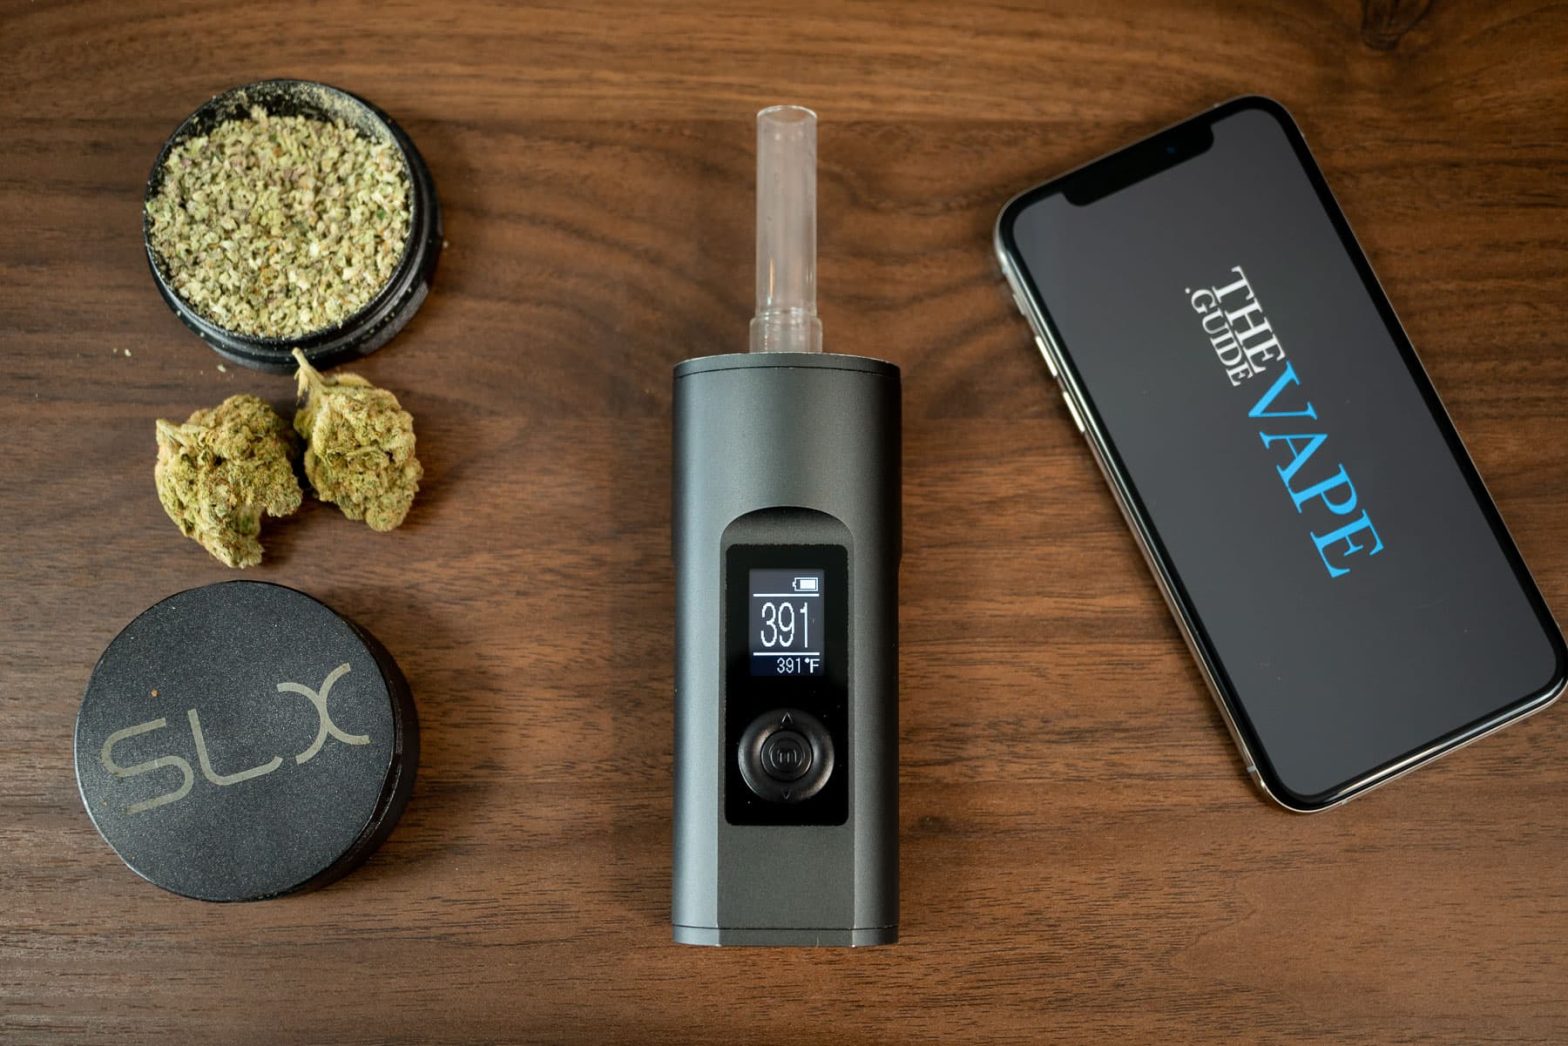 Top Vaporizers With The Best Battery Life